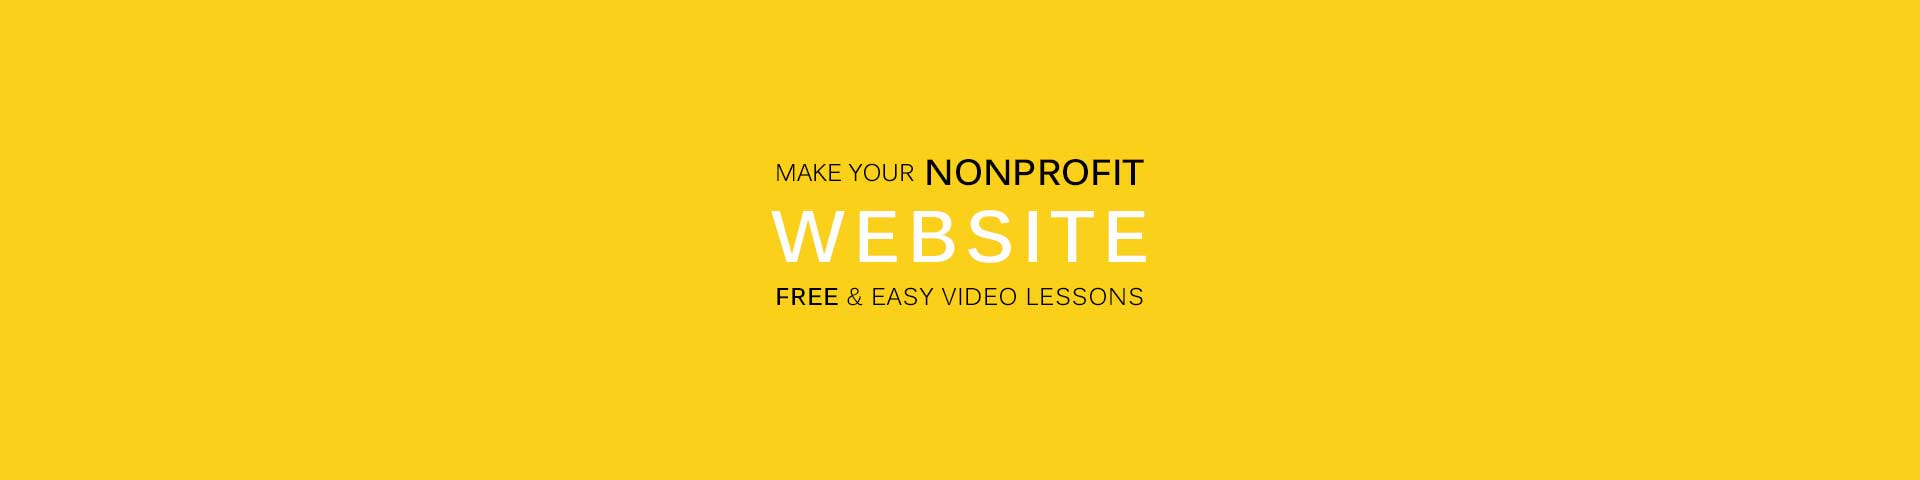 How to make a website for your nonprofit